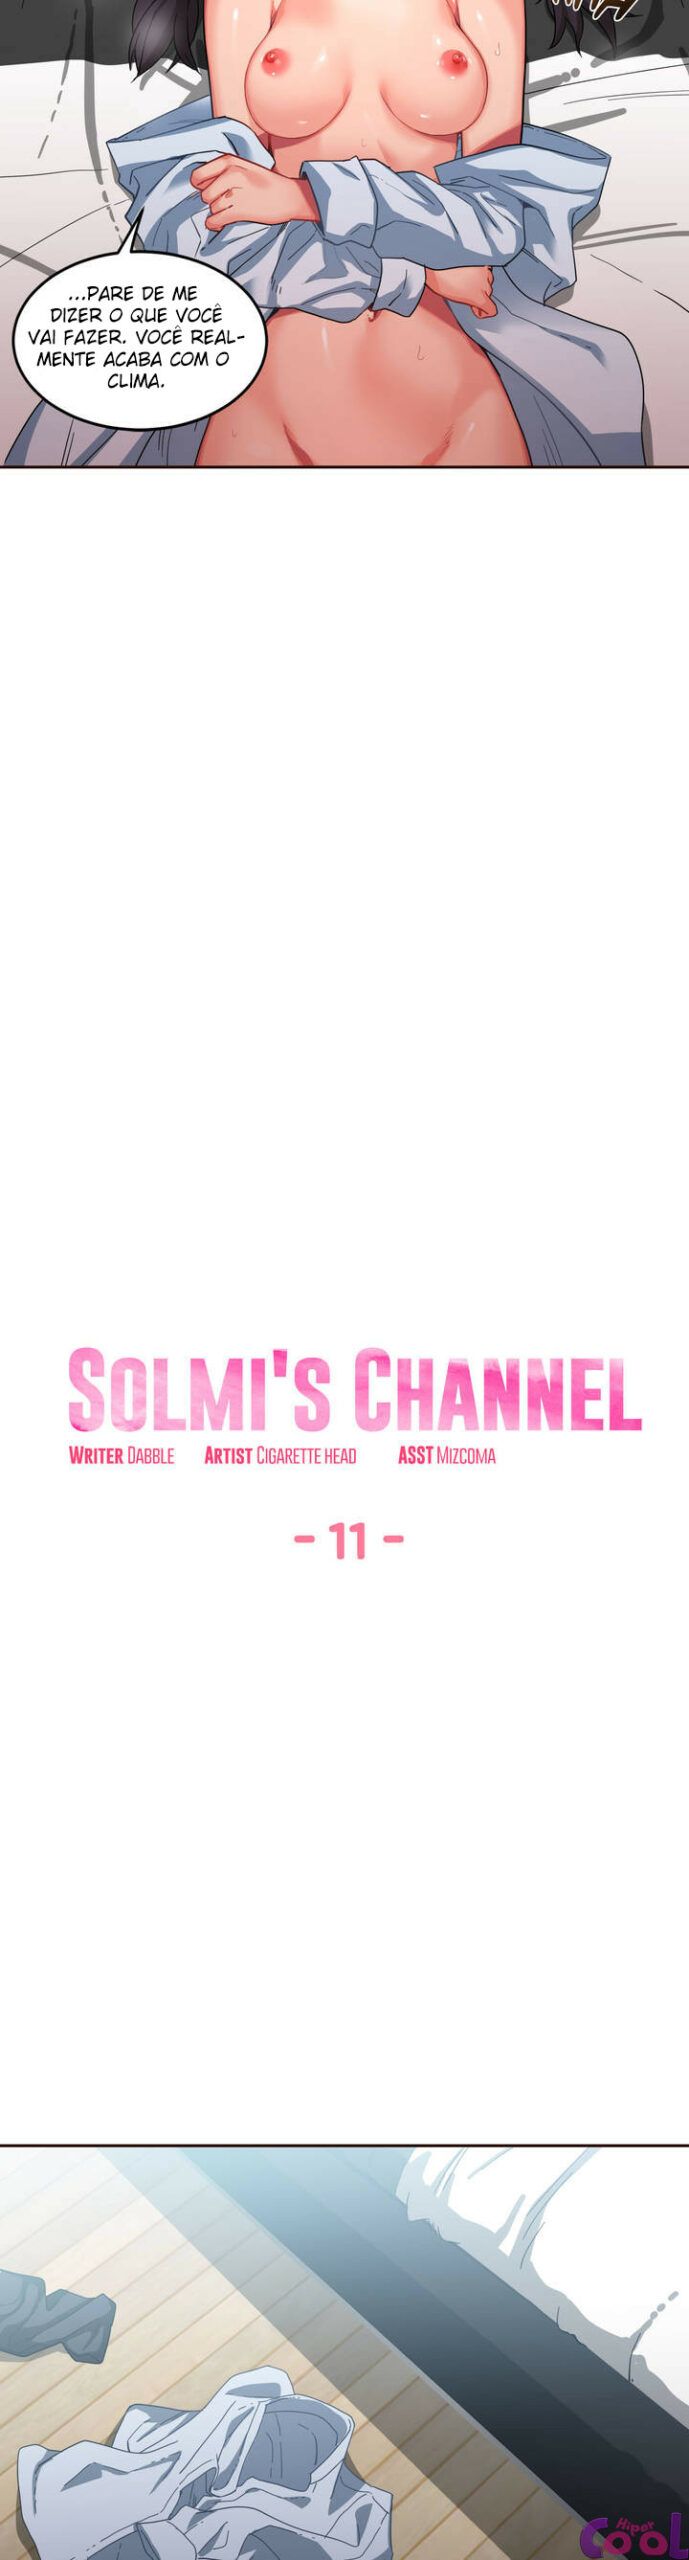 Solmis Channel 11